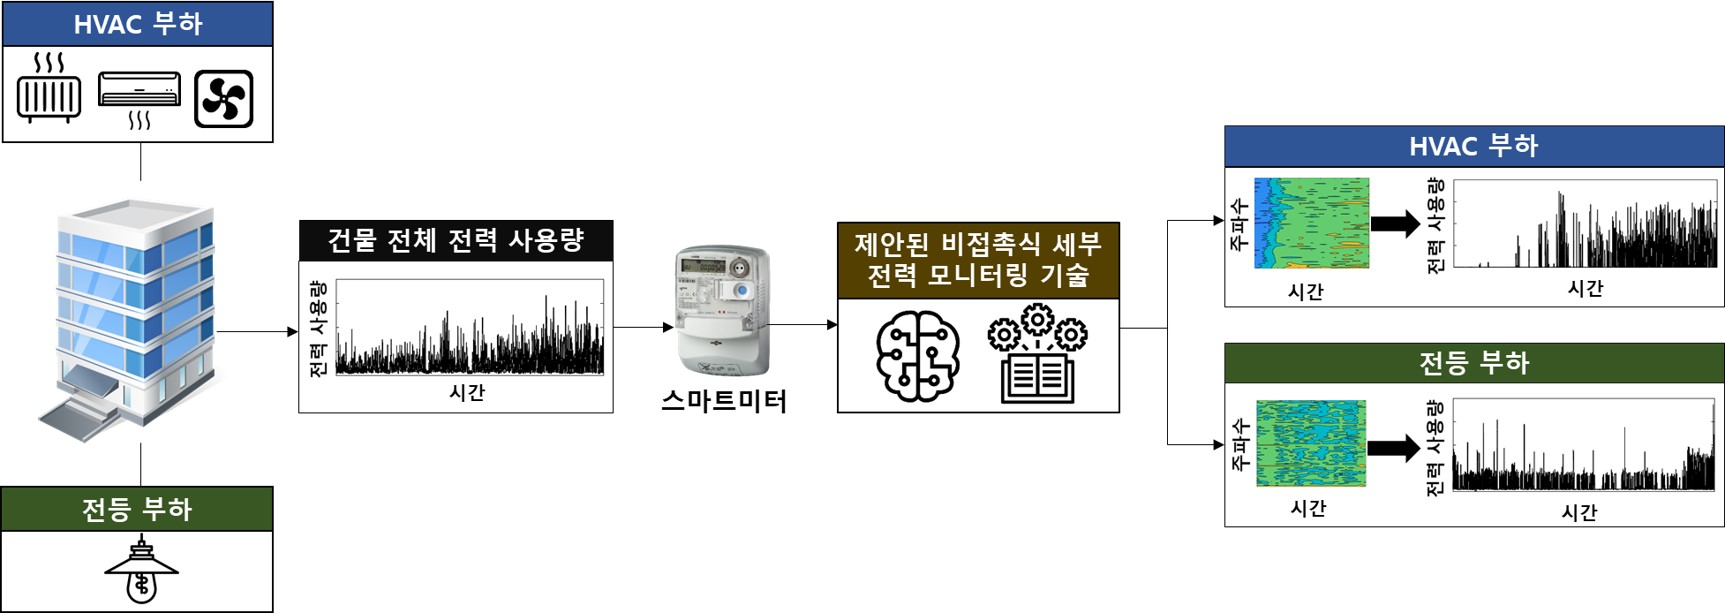 Professor Euiseok Hwang's research team develops contactless detailed power usage monitoring technology based on artificial intelligence 이미지